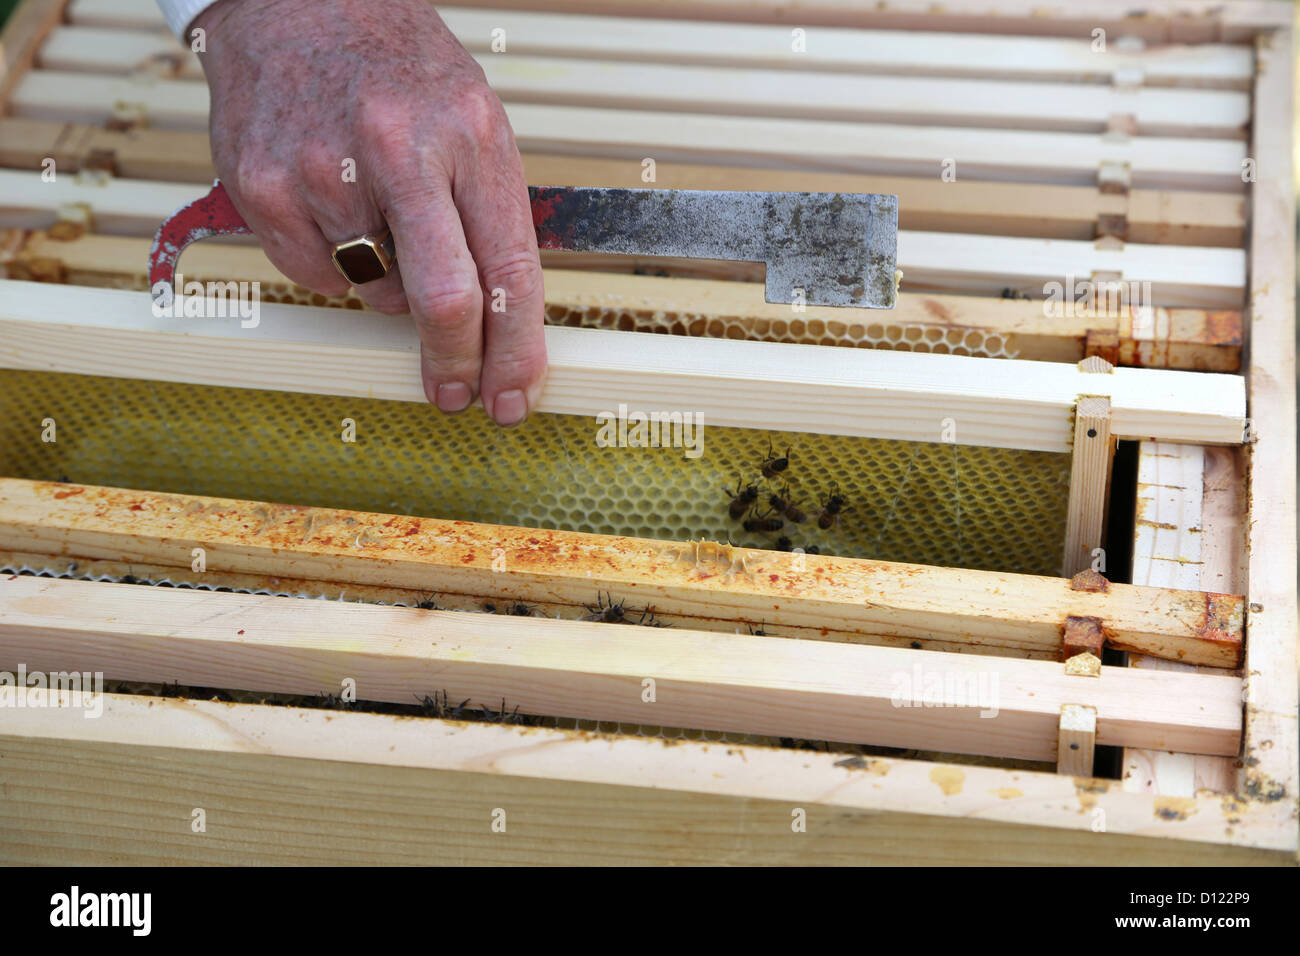 Beekeeper with Bee Tool With Hand On Hive Surrey England Stock Photo